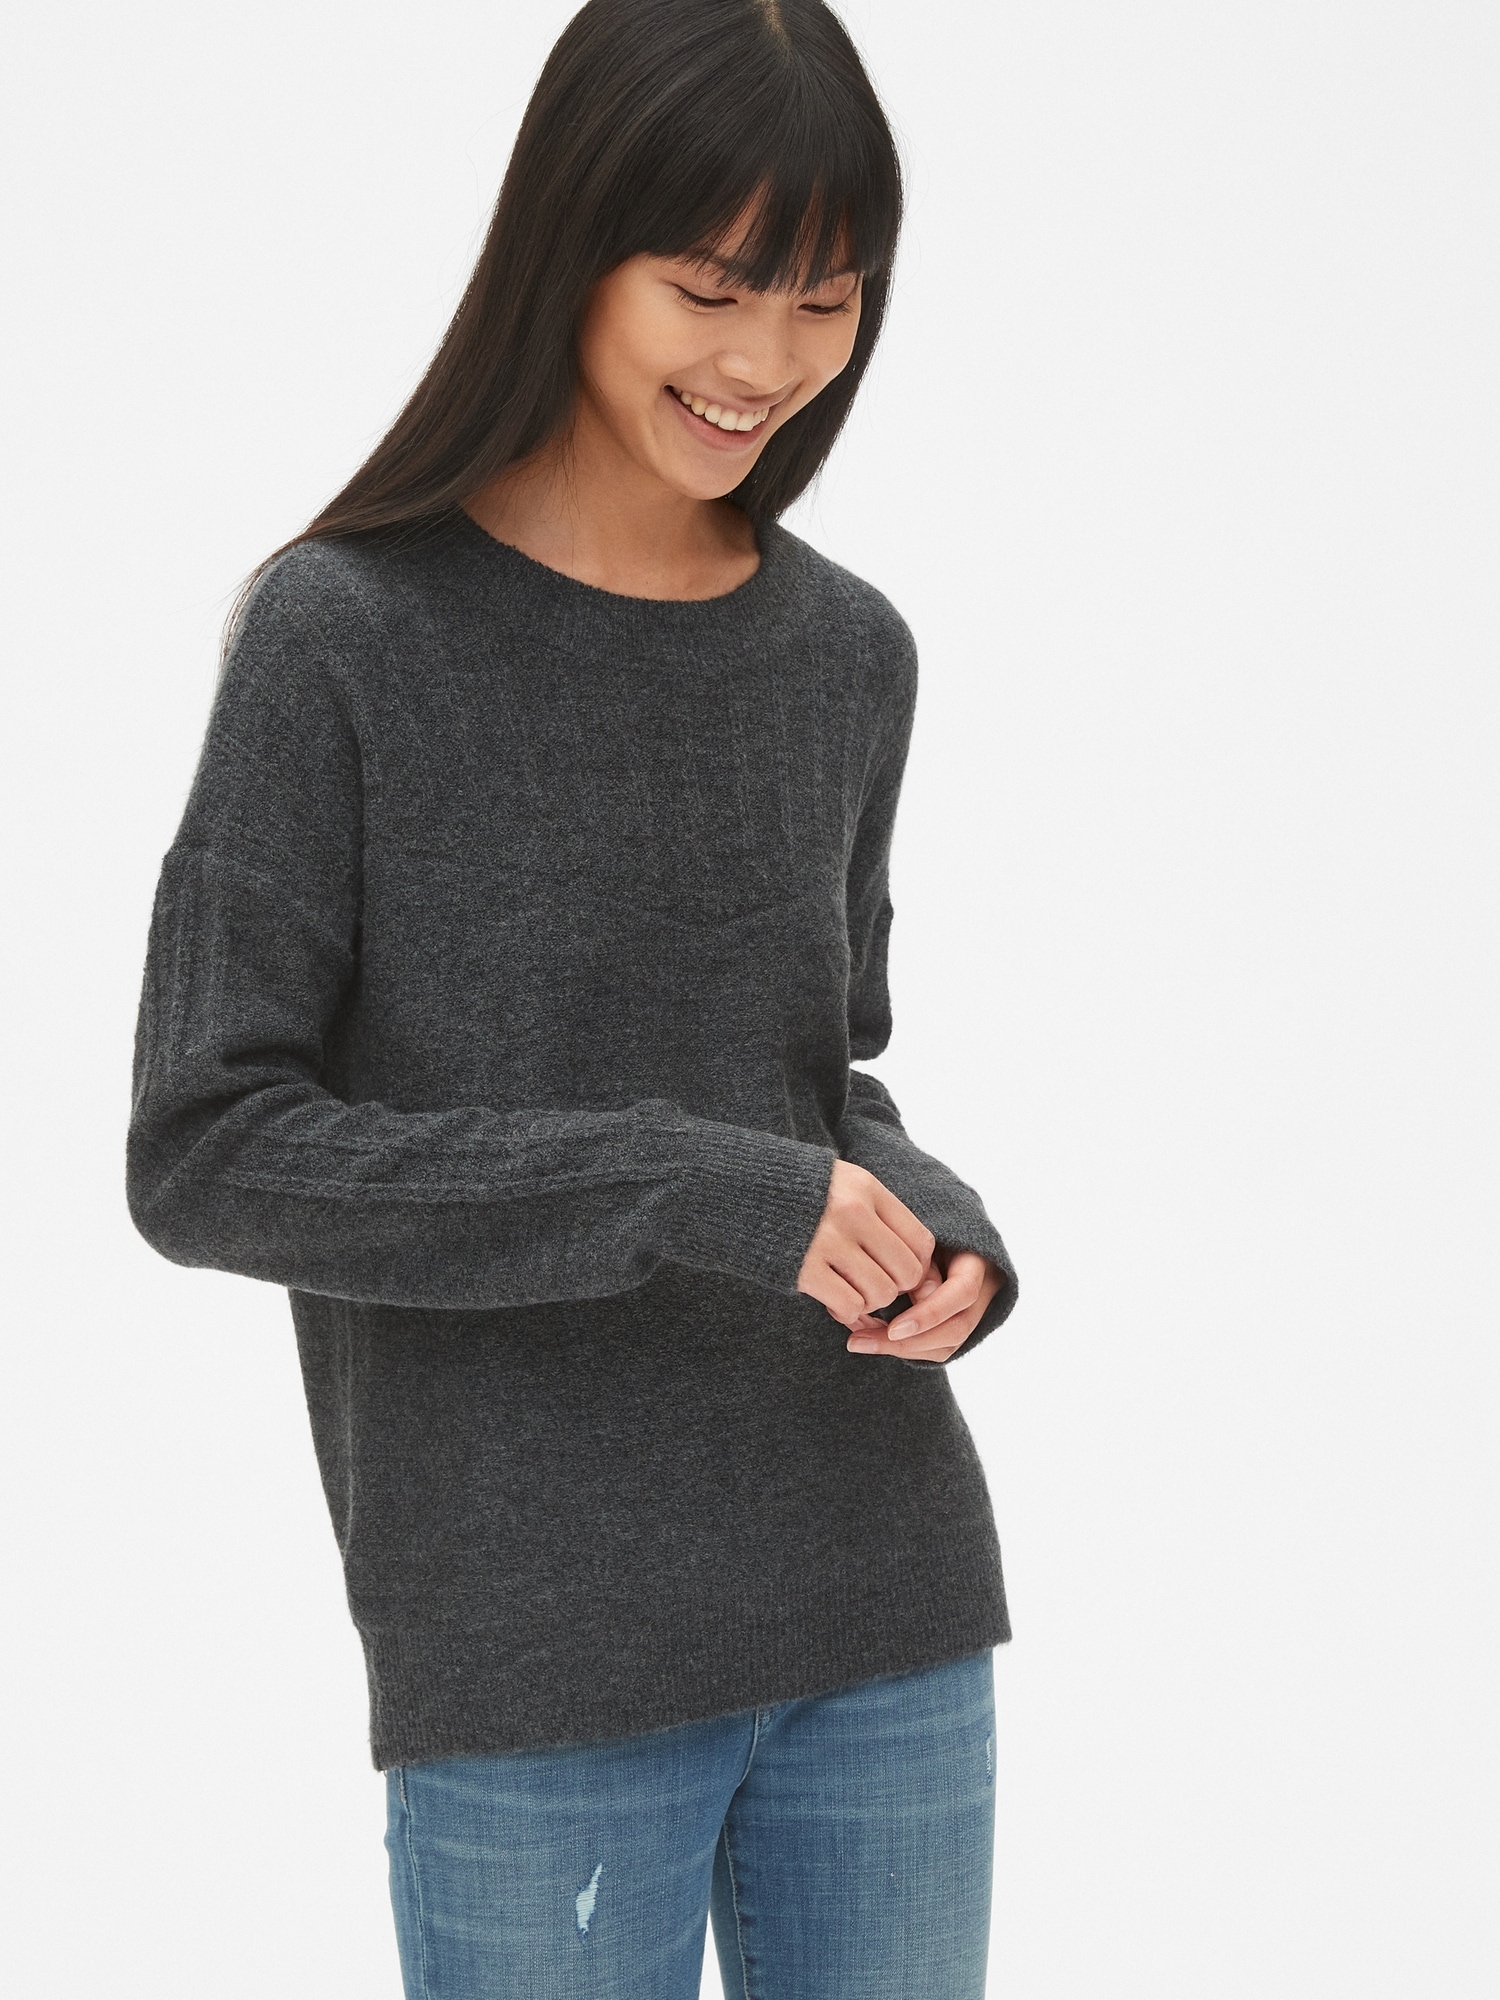 Lacy Pointelle Crewneck Pullover Sweater | Gap